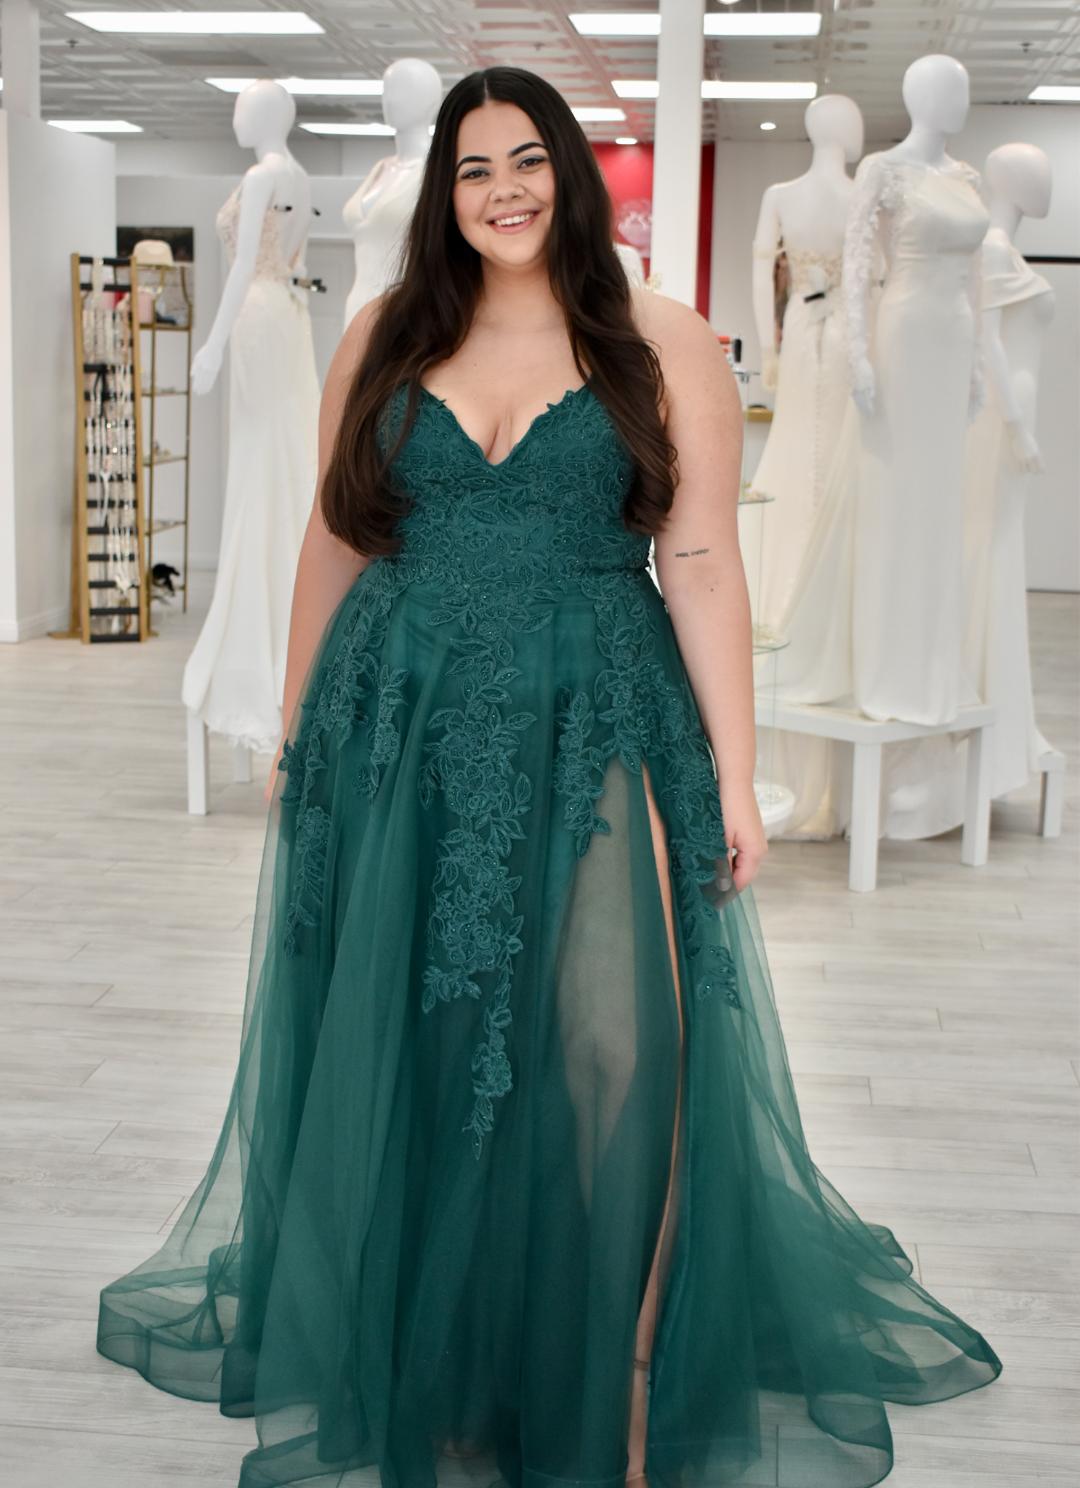 Choosing the Right Plus Size Prom Dress